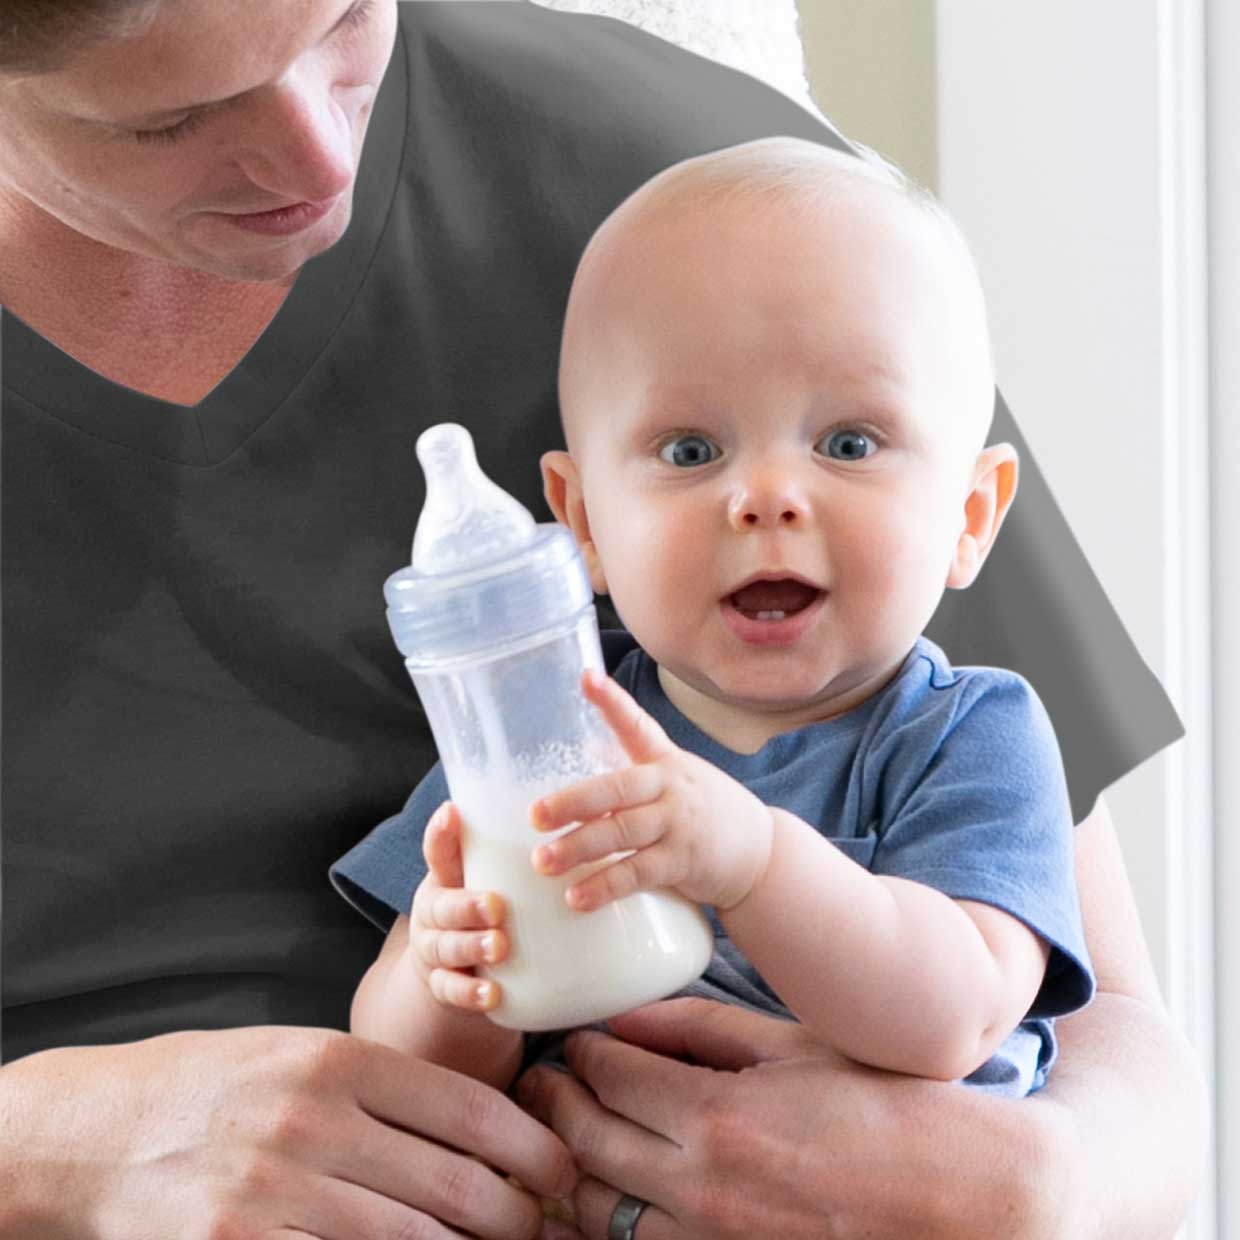 How to Get Rid of Your Toddler's Bottle